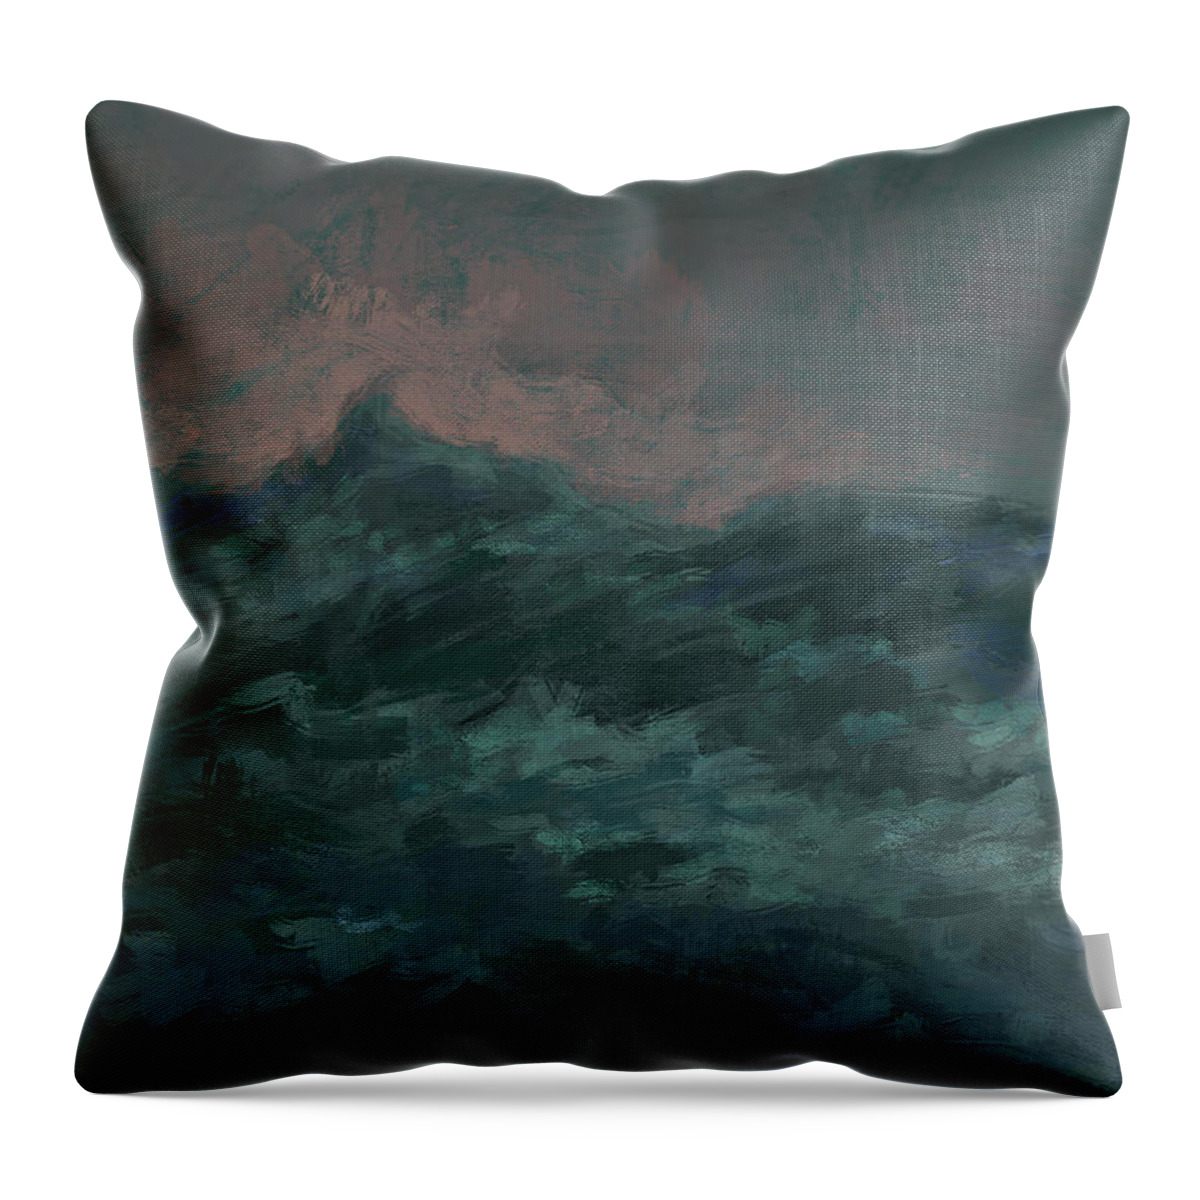 Shadesofblue Shades Blue Sea Seascape Waves Wavestorm Landscape Impressionism Expresionism Abstractart Abstract Throw Pillow featuring the digital art Shades of blue by M A Ibanez